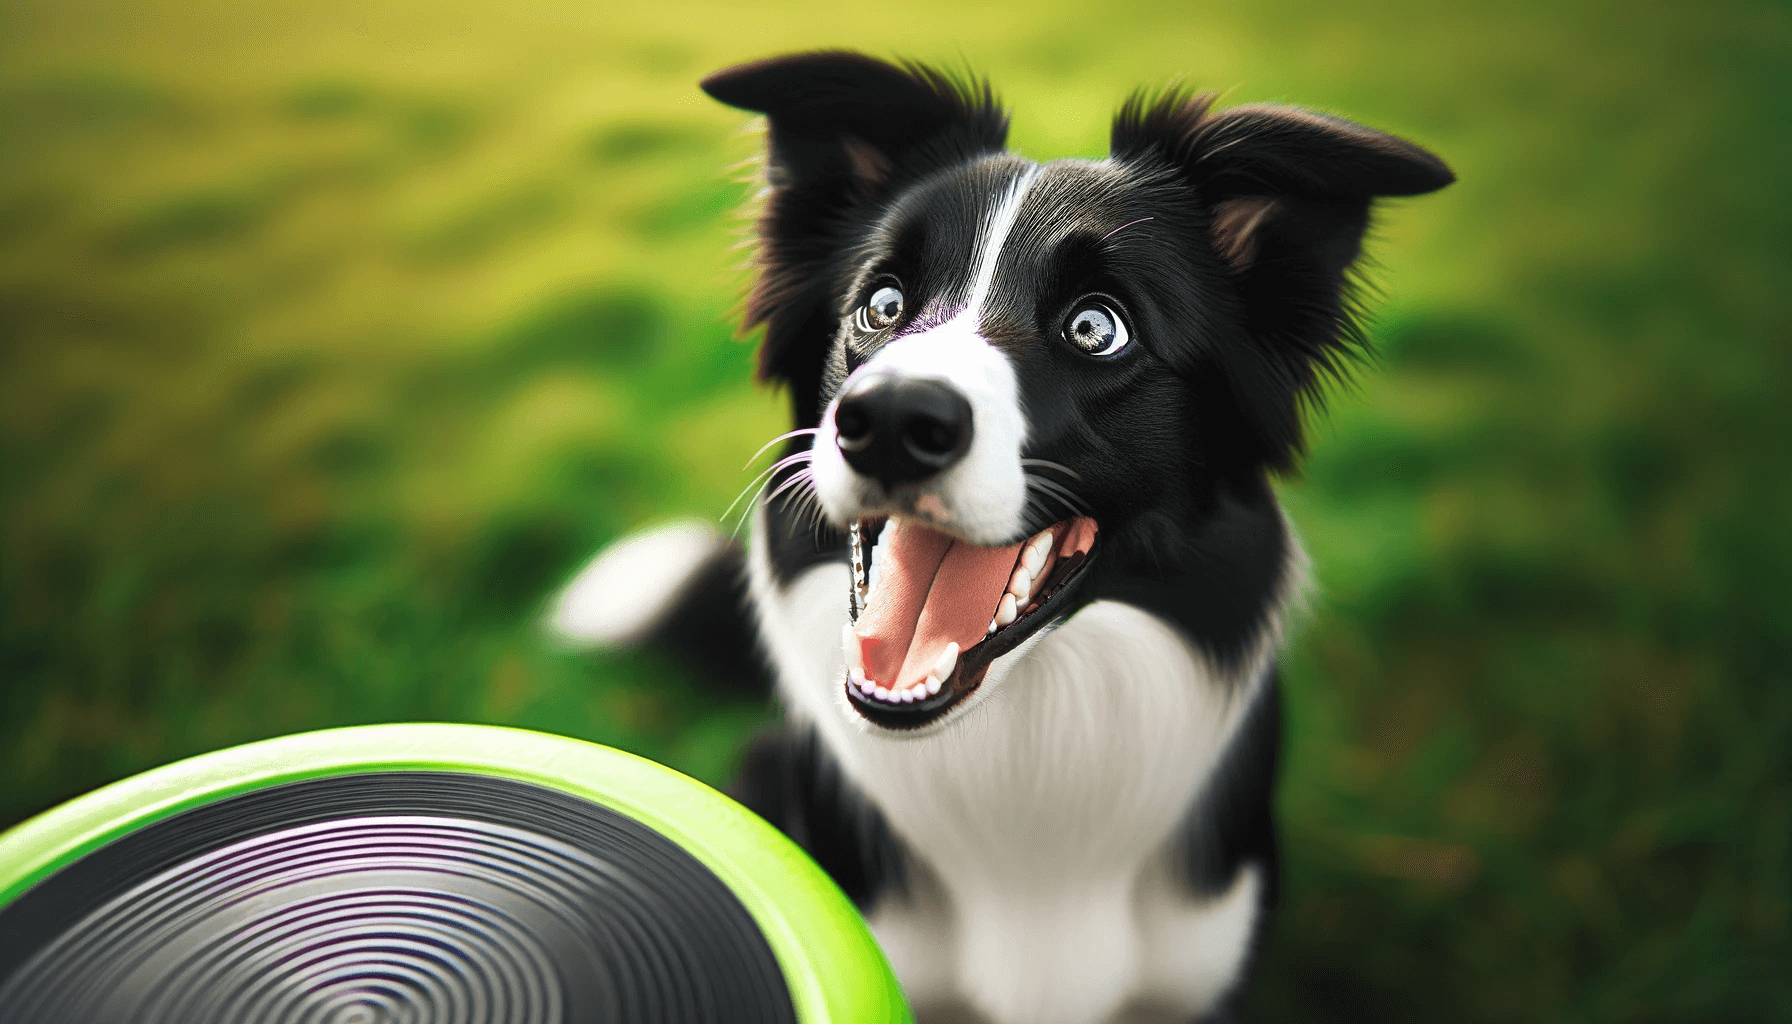 Smooth Coat Border Collie looking eagerly at a frisbee on the ground in front of it.